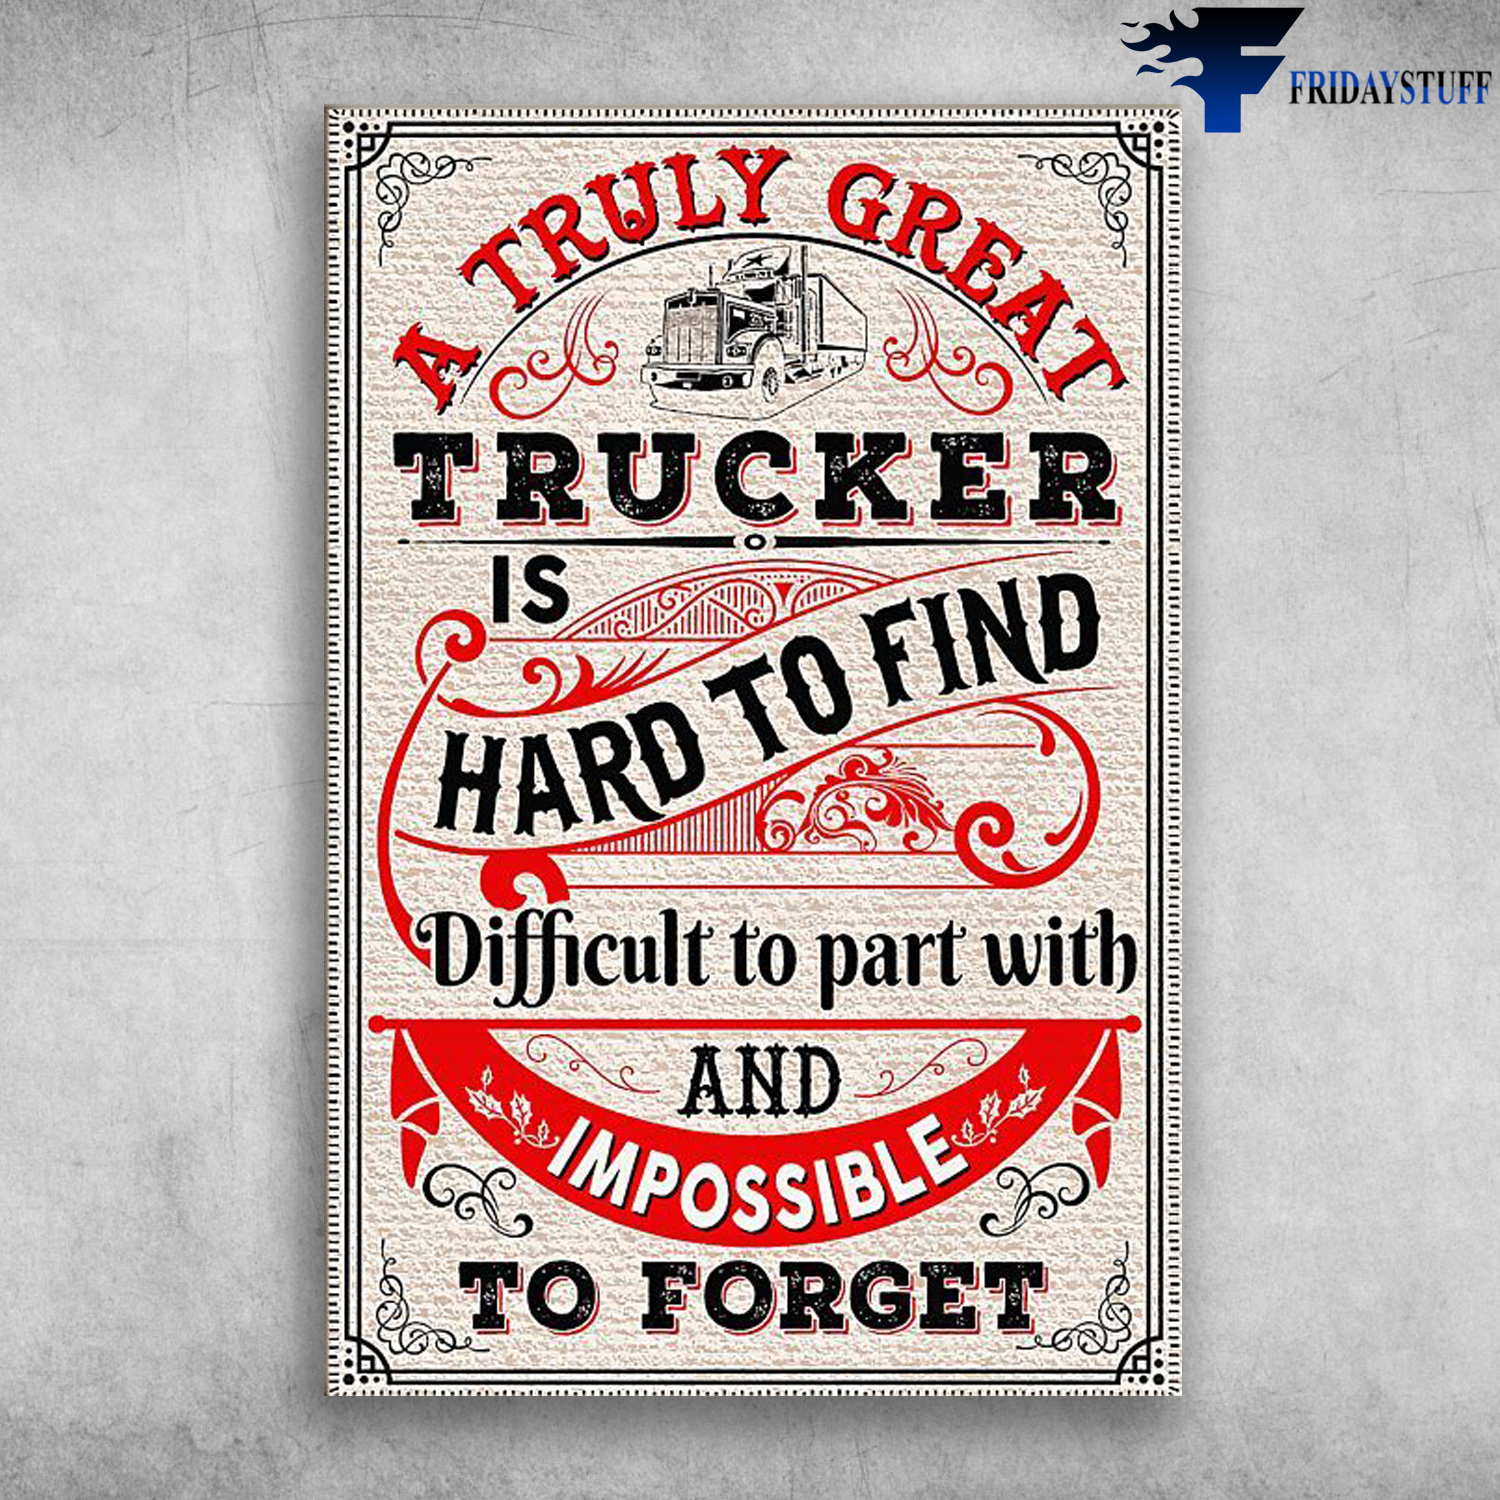 The Truck - A Truly Great, Trucker Is Hard To Find, Difficult To Part With And Impossible To Forget